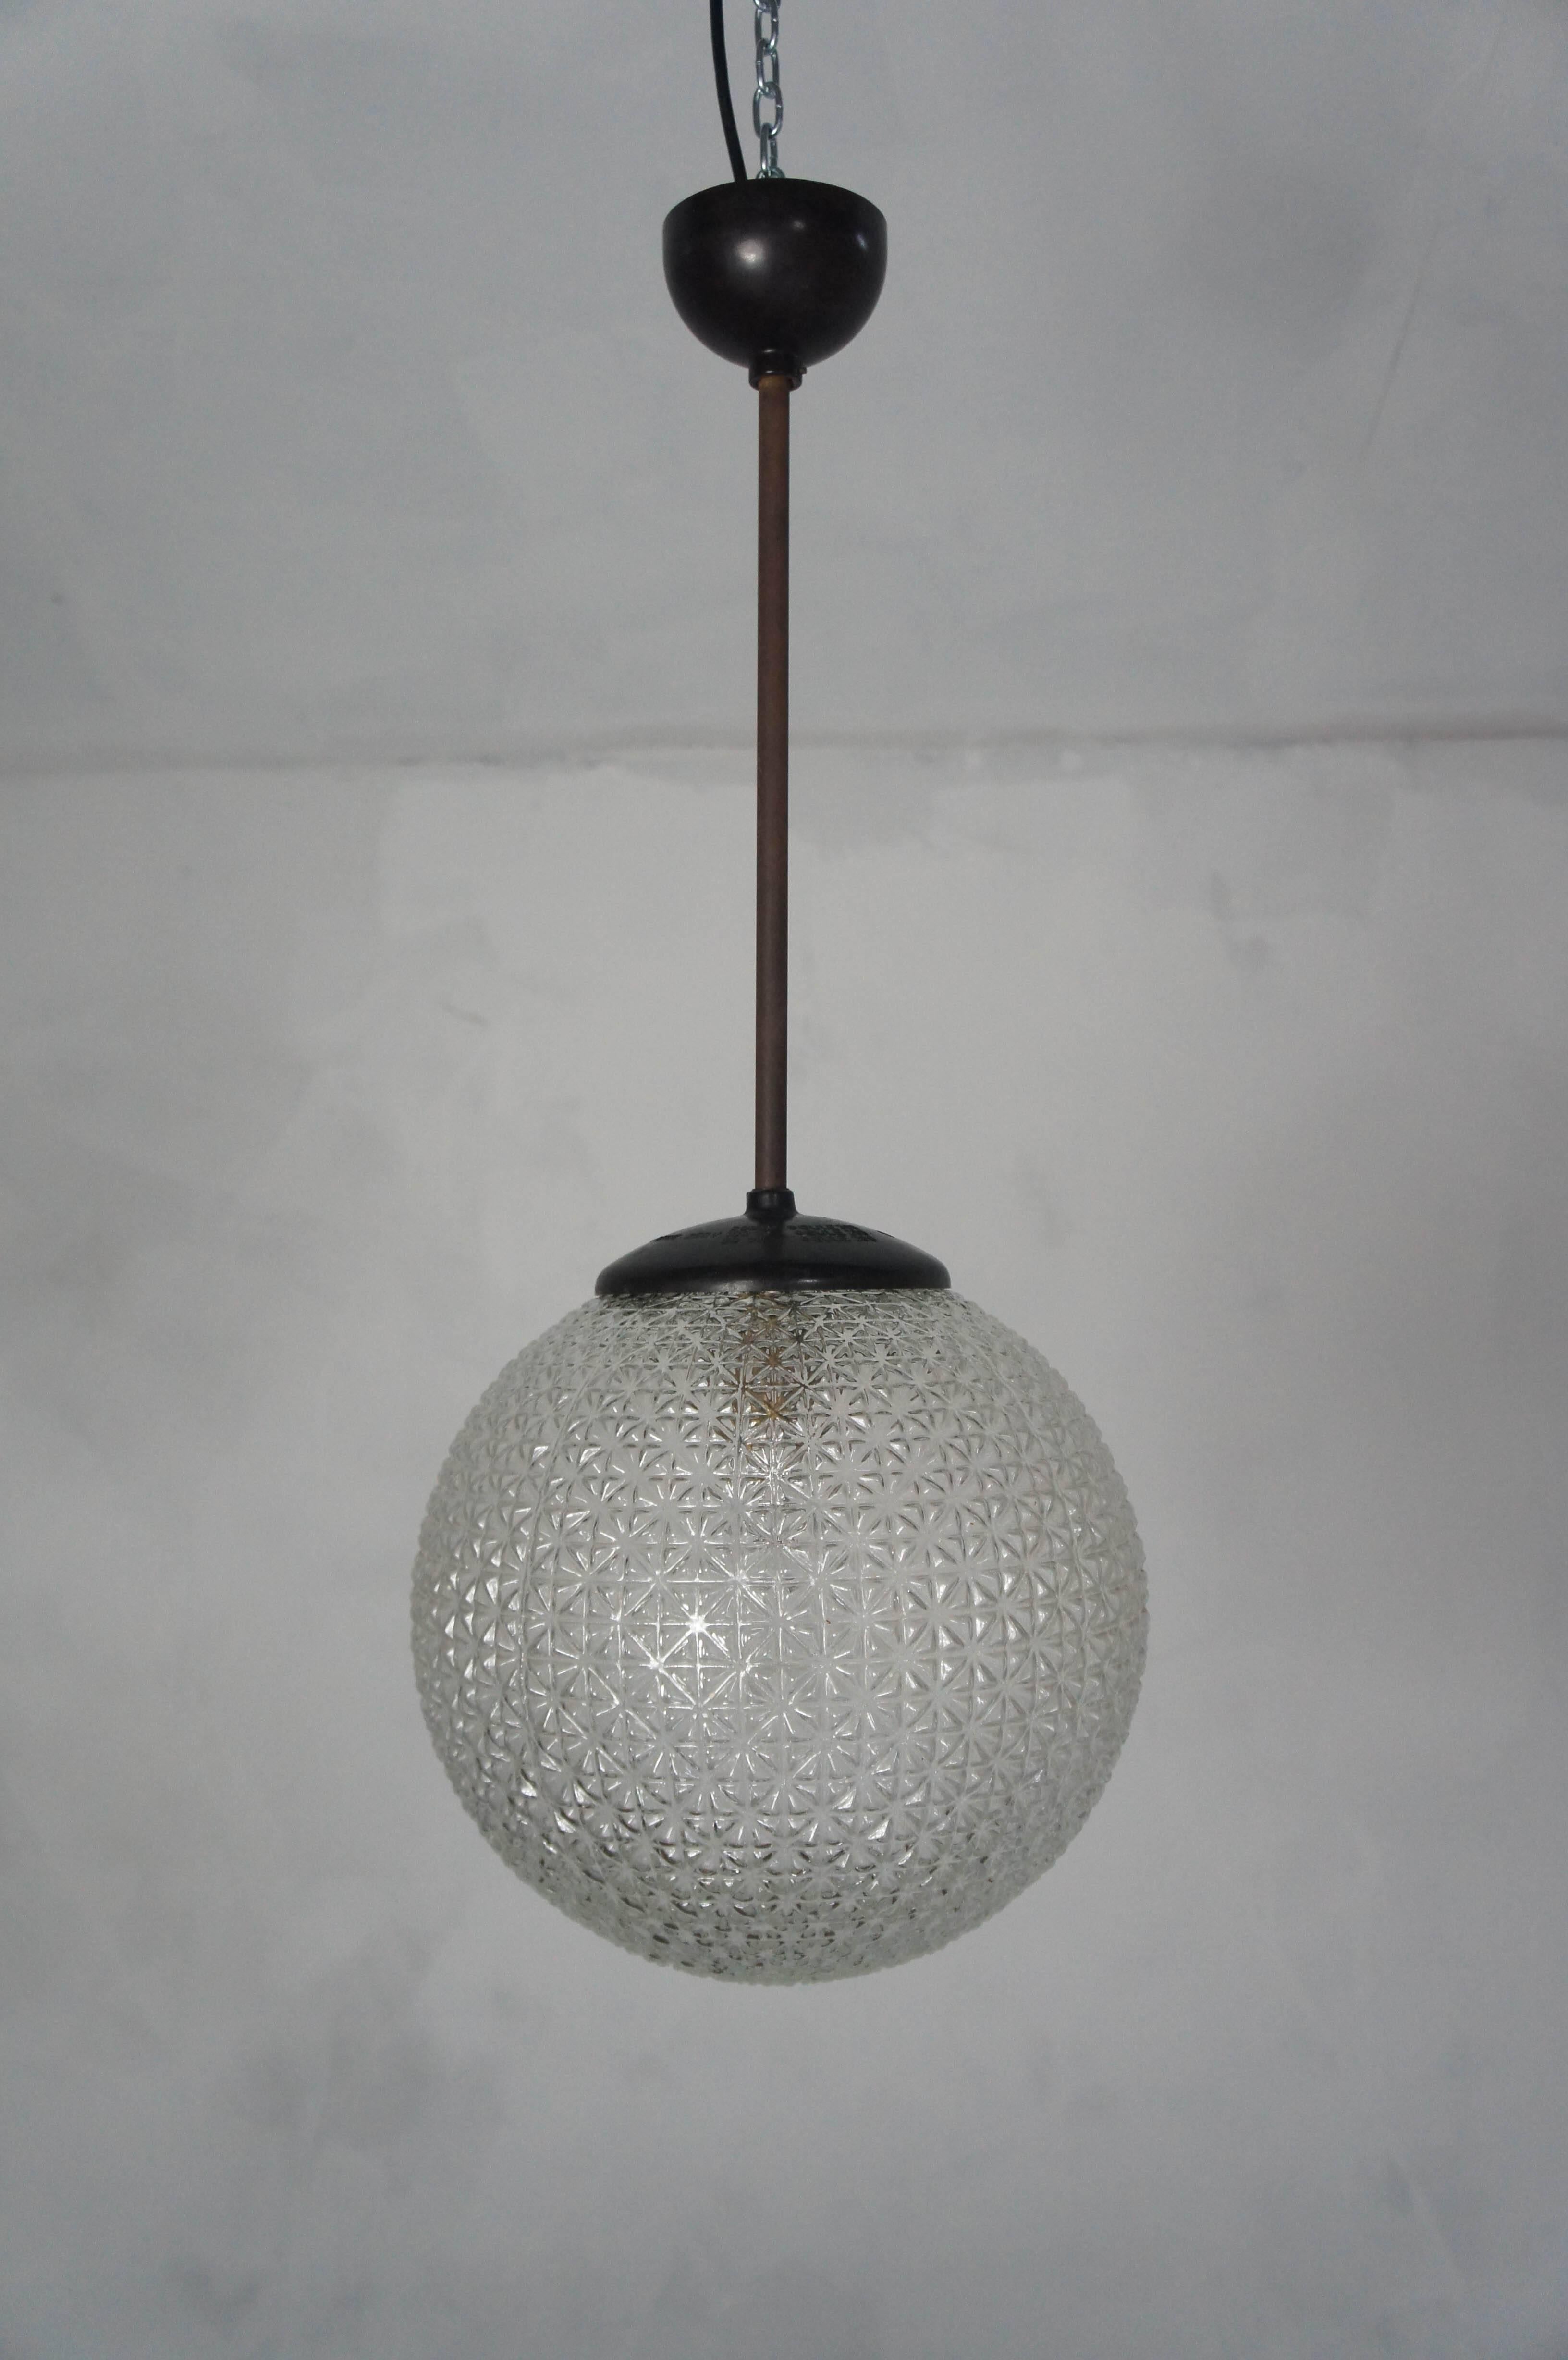 Fantastic pair of midcentury glass globe lights featuring bakelite gallery.
Wired and ready to hang.